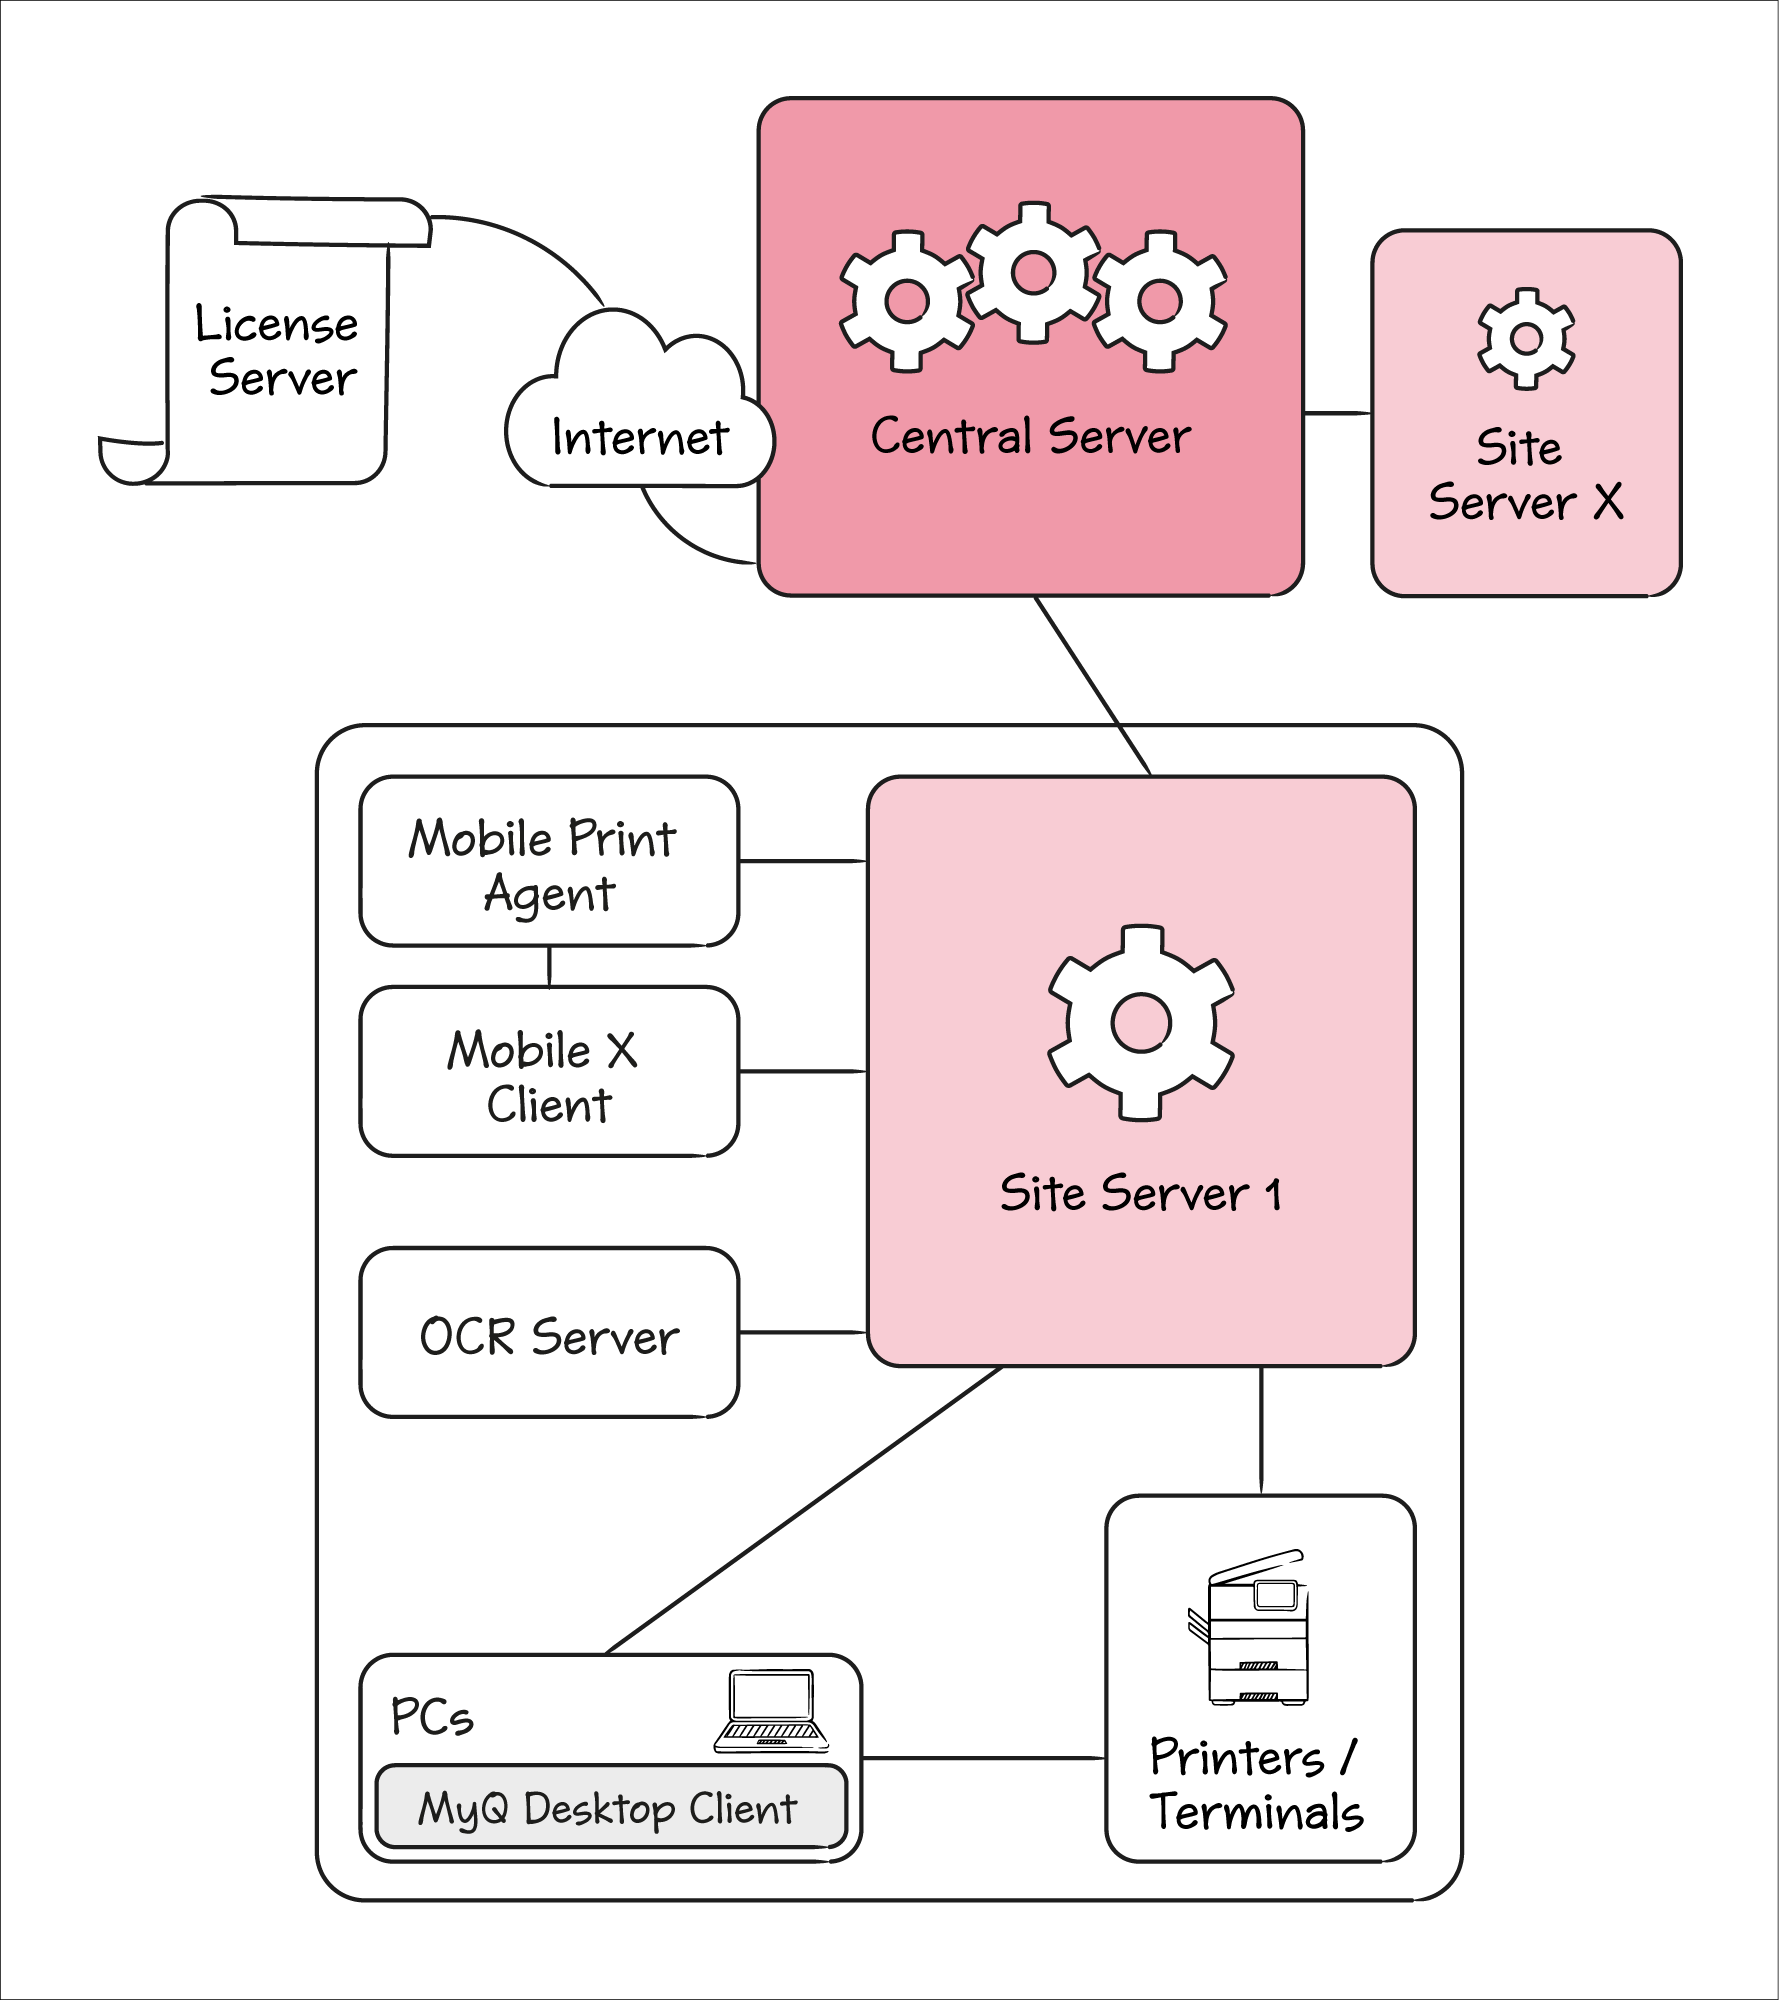 MyQ Servers and apps overview